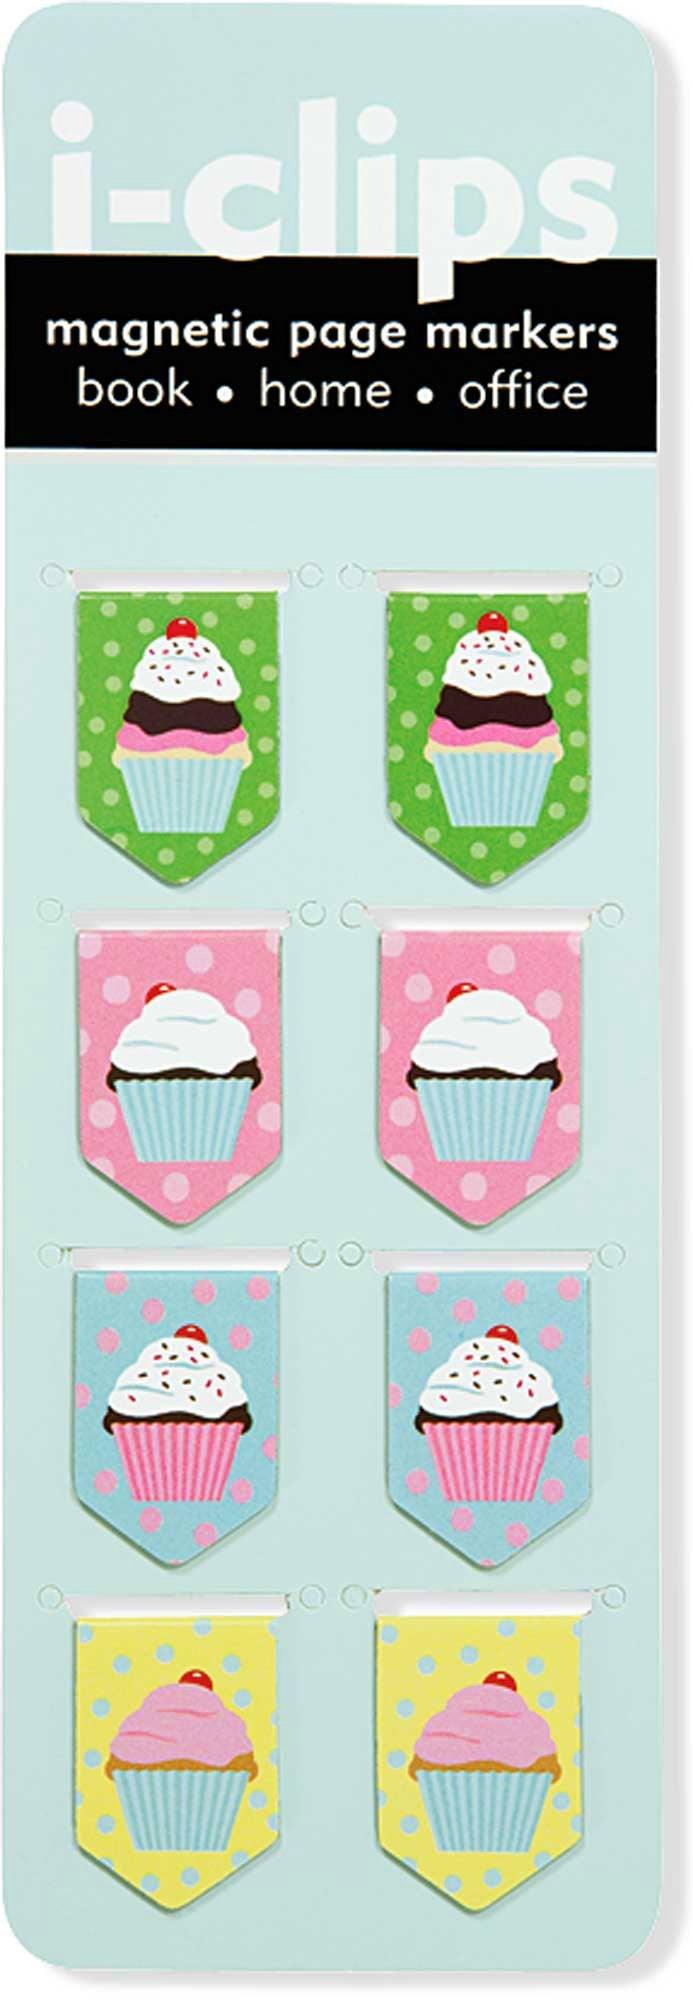 i-Clips Magnetic Page Markers: Cupcakes - SpectrumStore SG